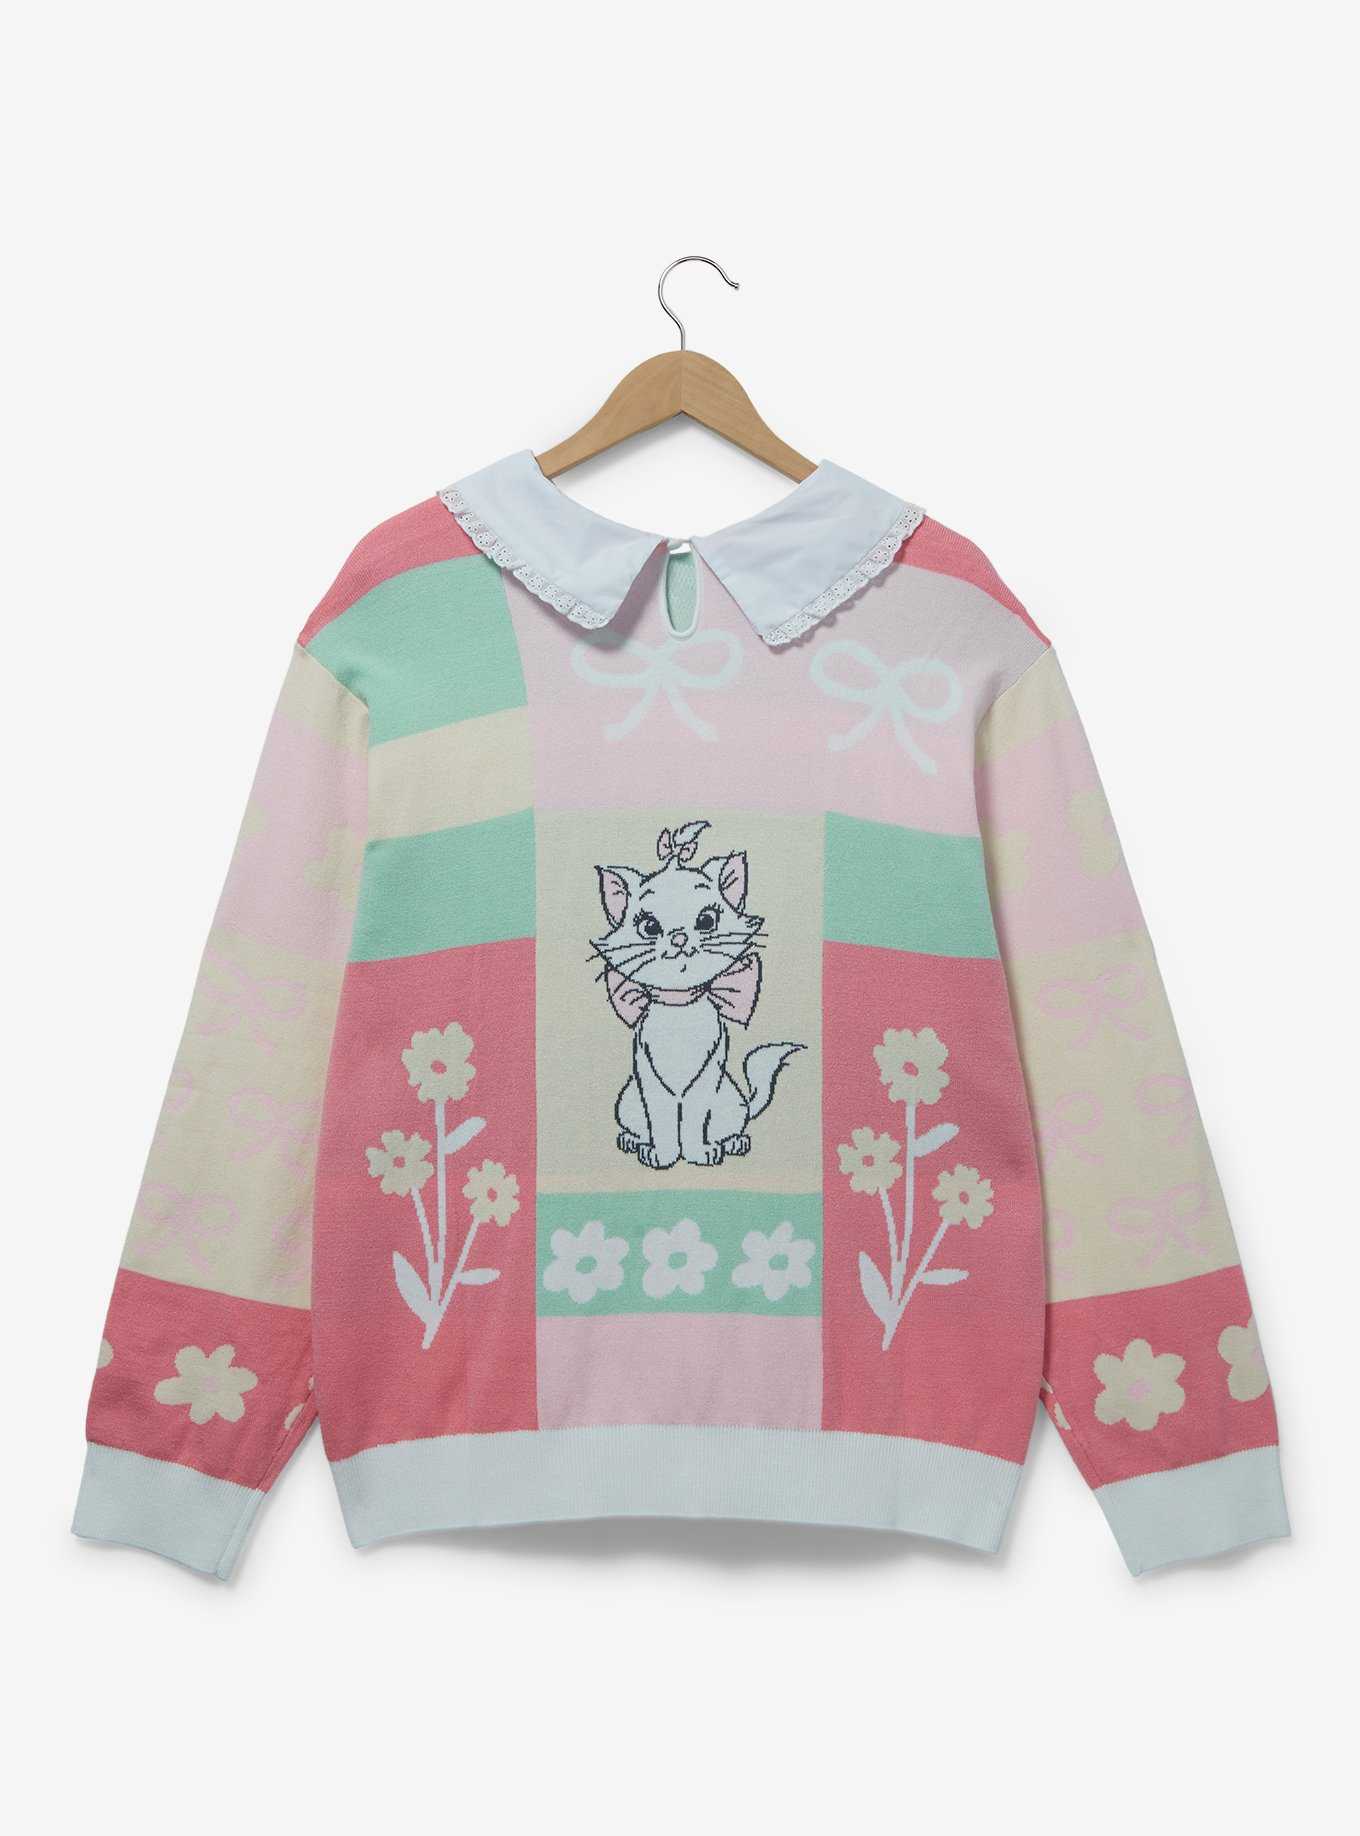 Disney The Aristocats Marie Floral Collared Women's Plus Size Sweater - BoxLunch Exclusive, , hi-res